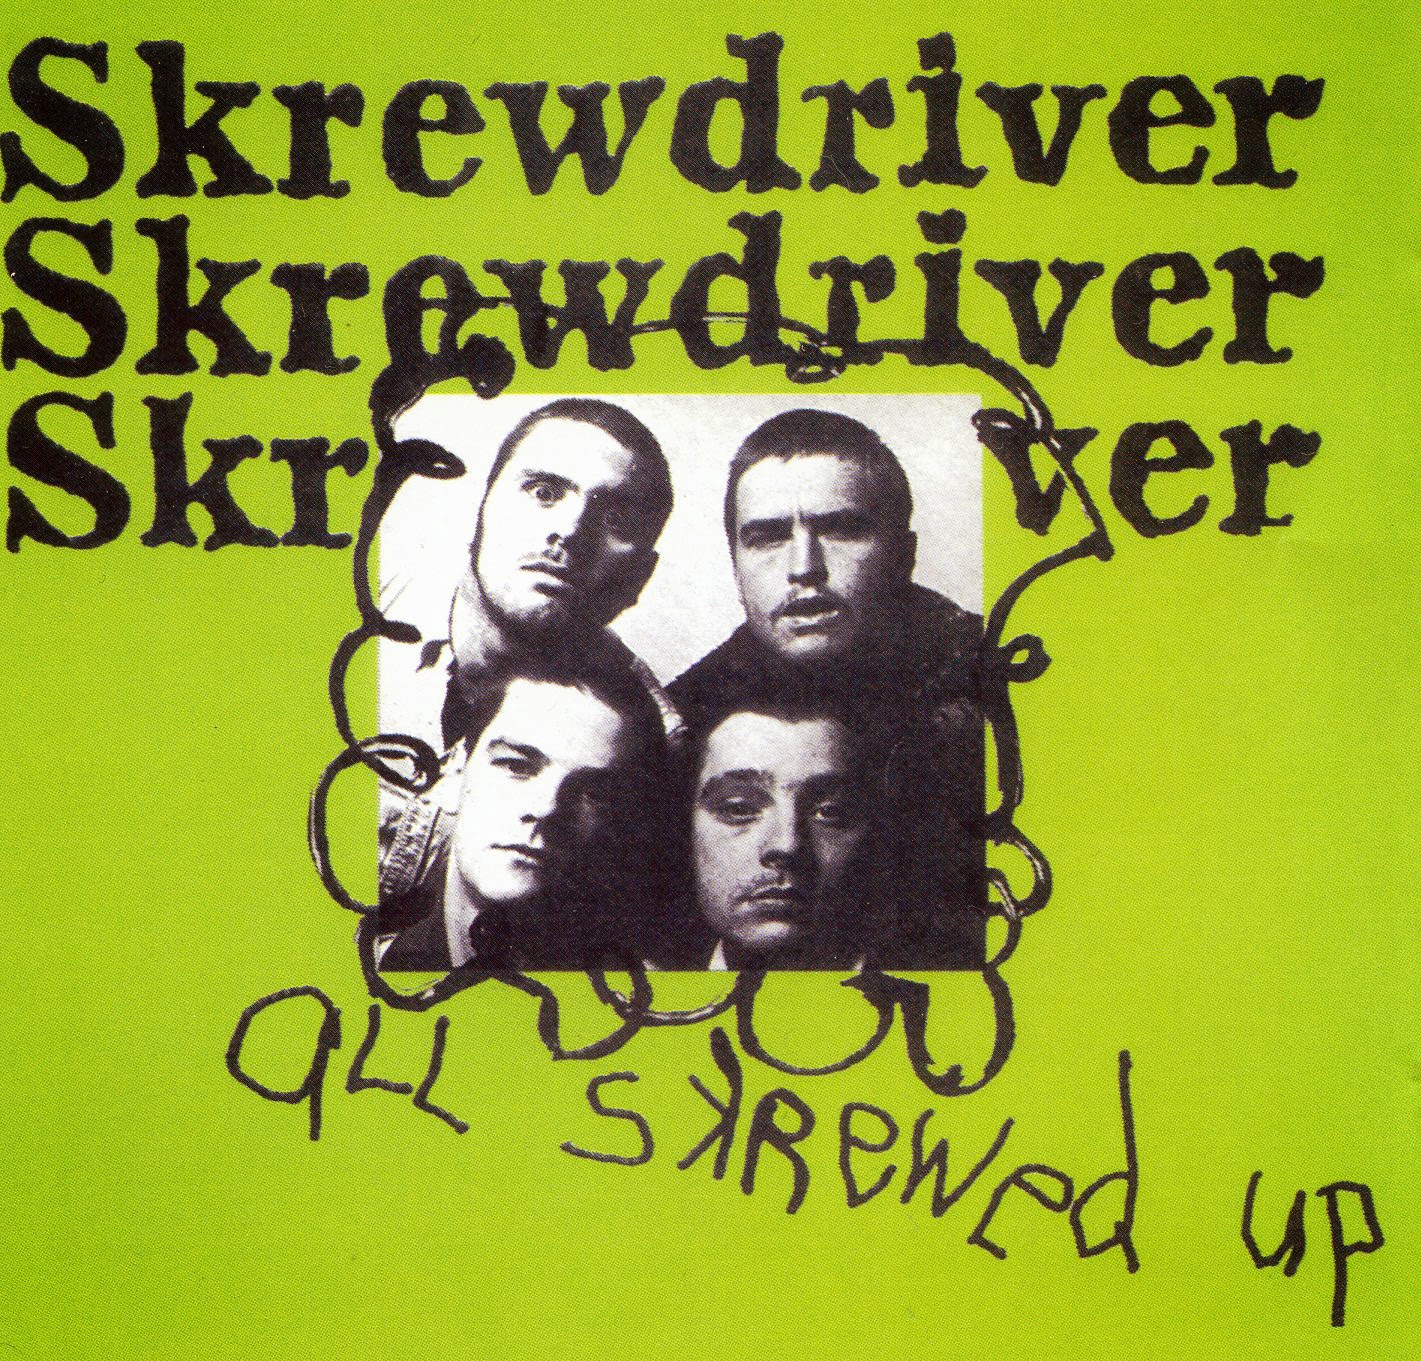 All Skrewed Up An Examination of Skrewdriver's Earliest Release 